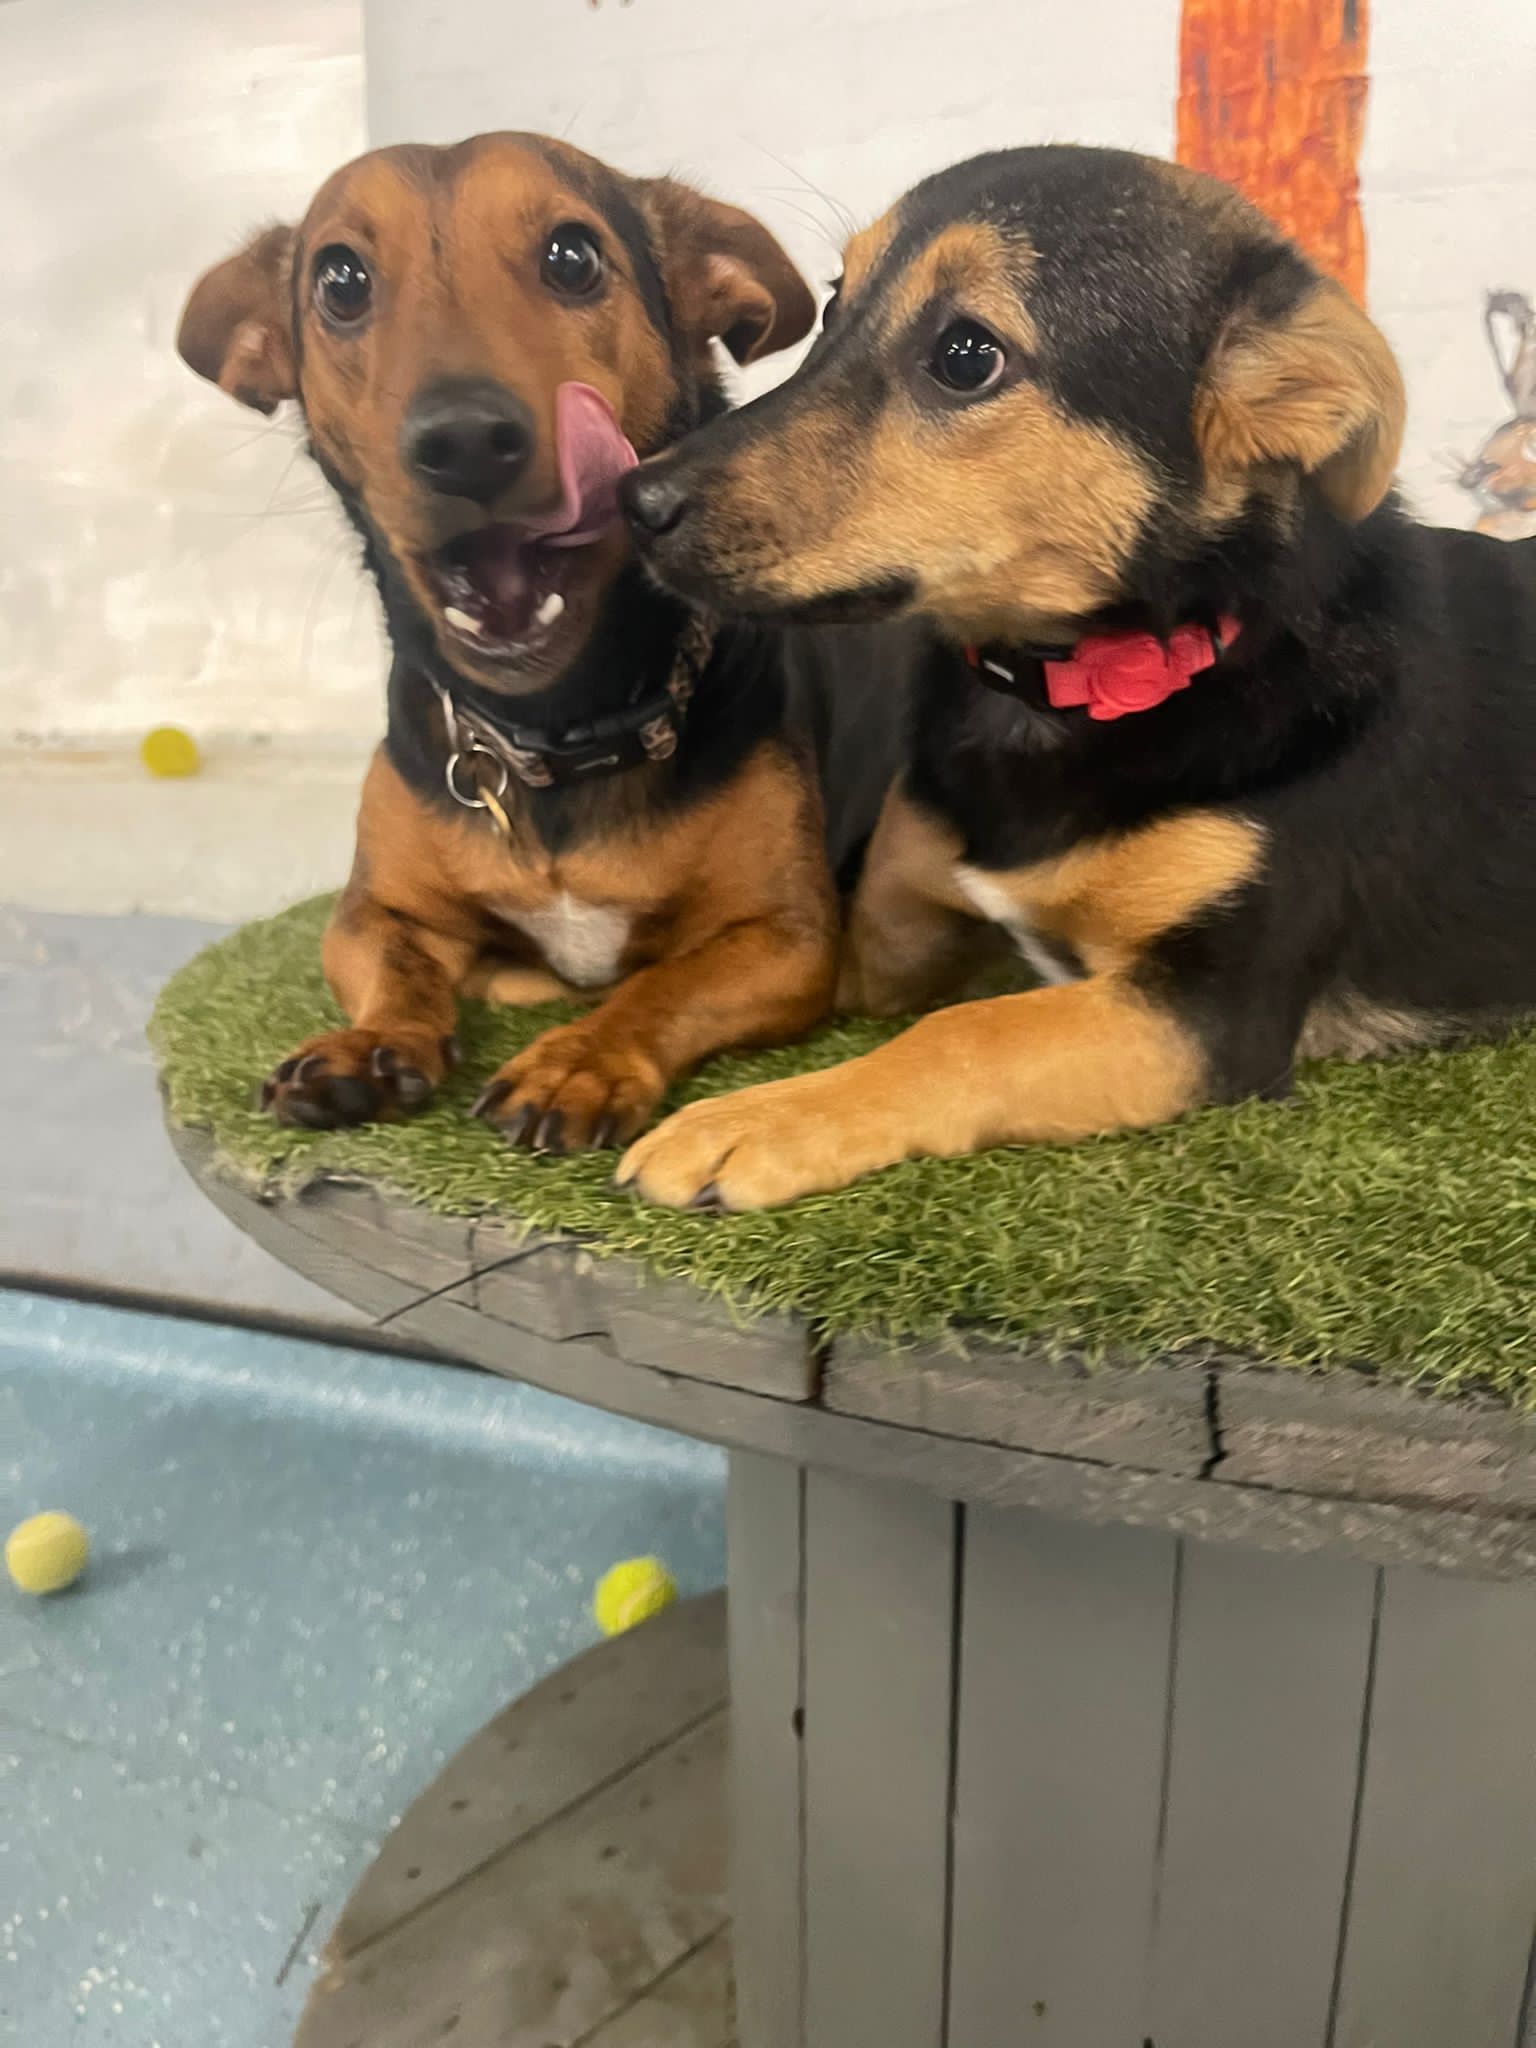 Cookie the puppy sitting on a raised fake grass bed, next to Valentine the Dashund, with Cookie's right paw completely under Valentine. Valentine is mid yawn/lick and her tongue is half way up her face, and Cookie is turned towards her, with her easrs back in a very happy little time